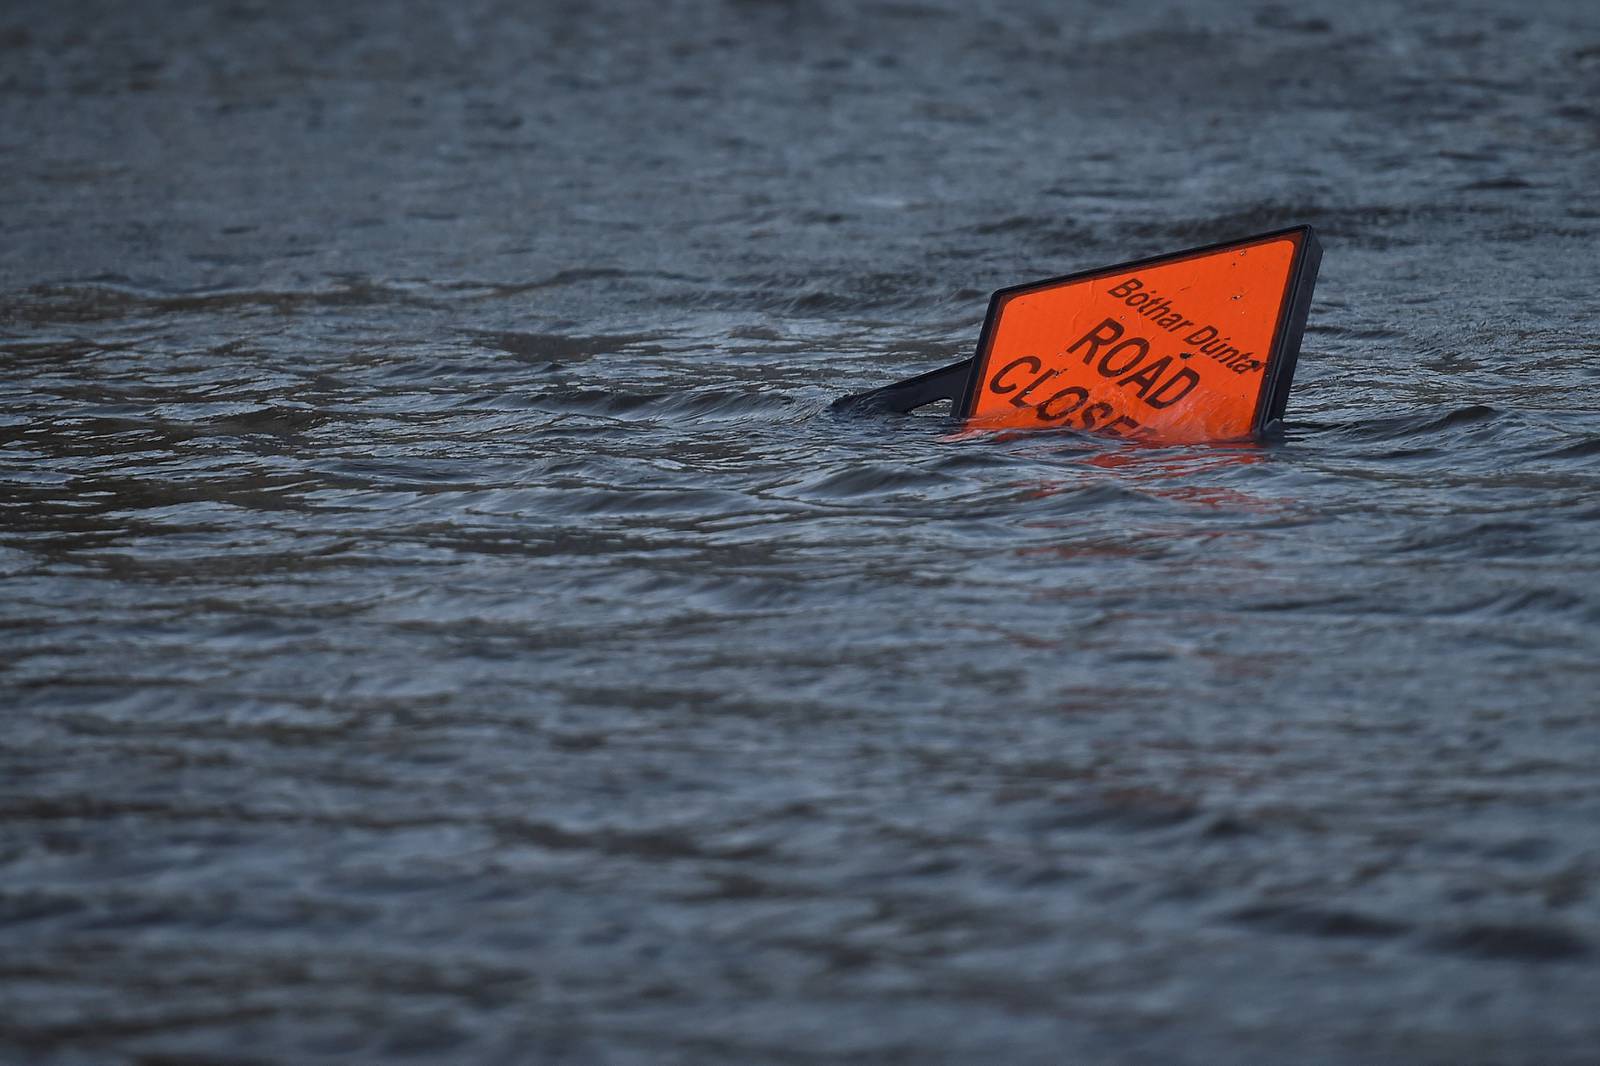 A 'road closed' sign is seen submerged in floodwater during Storm Ophelia in Galway, Ireland October 16, 2017. REUTERS/Clodagh Kilcoyne